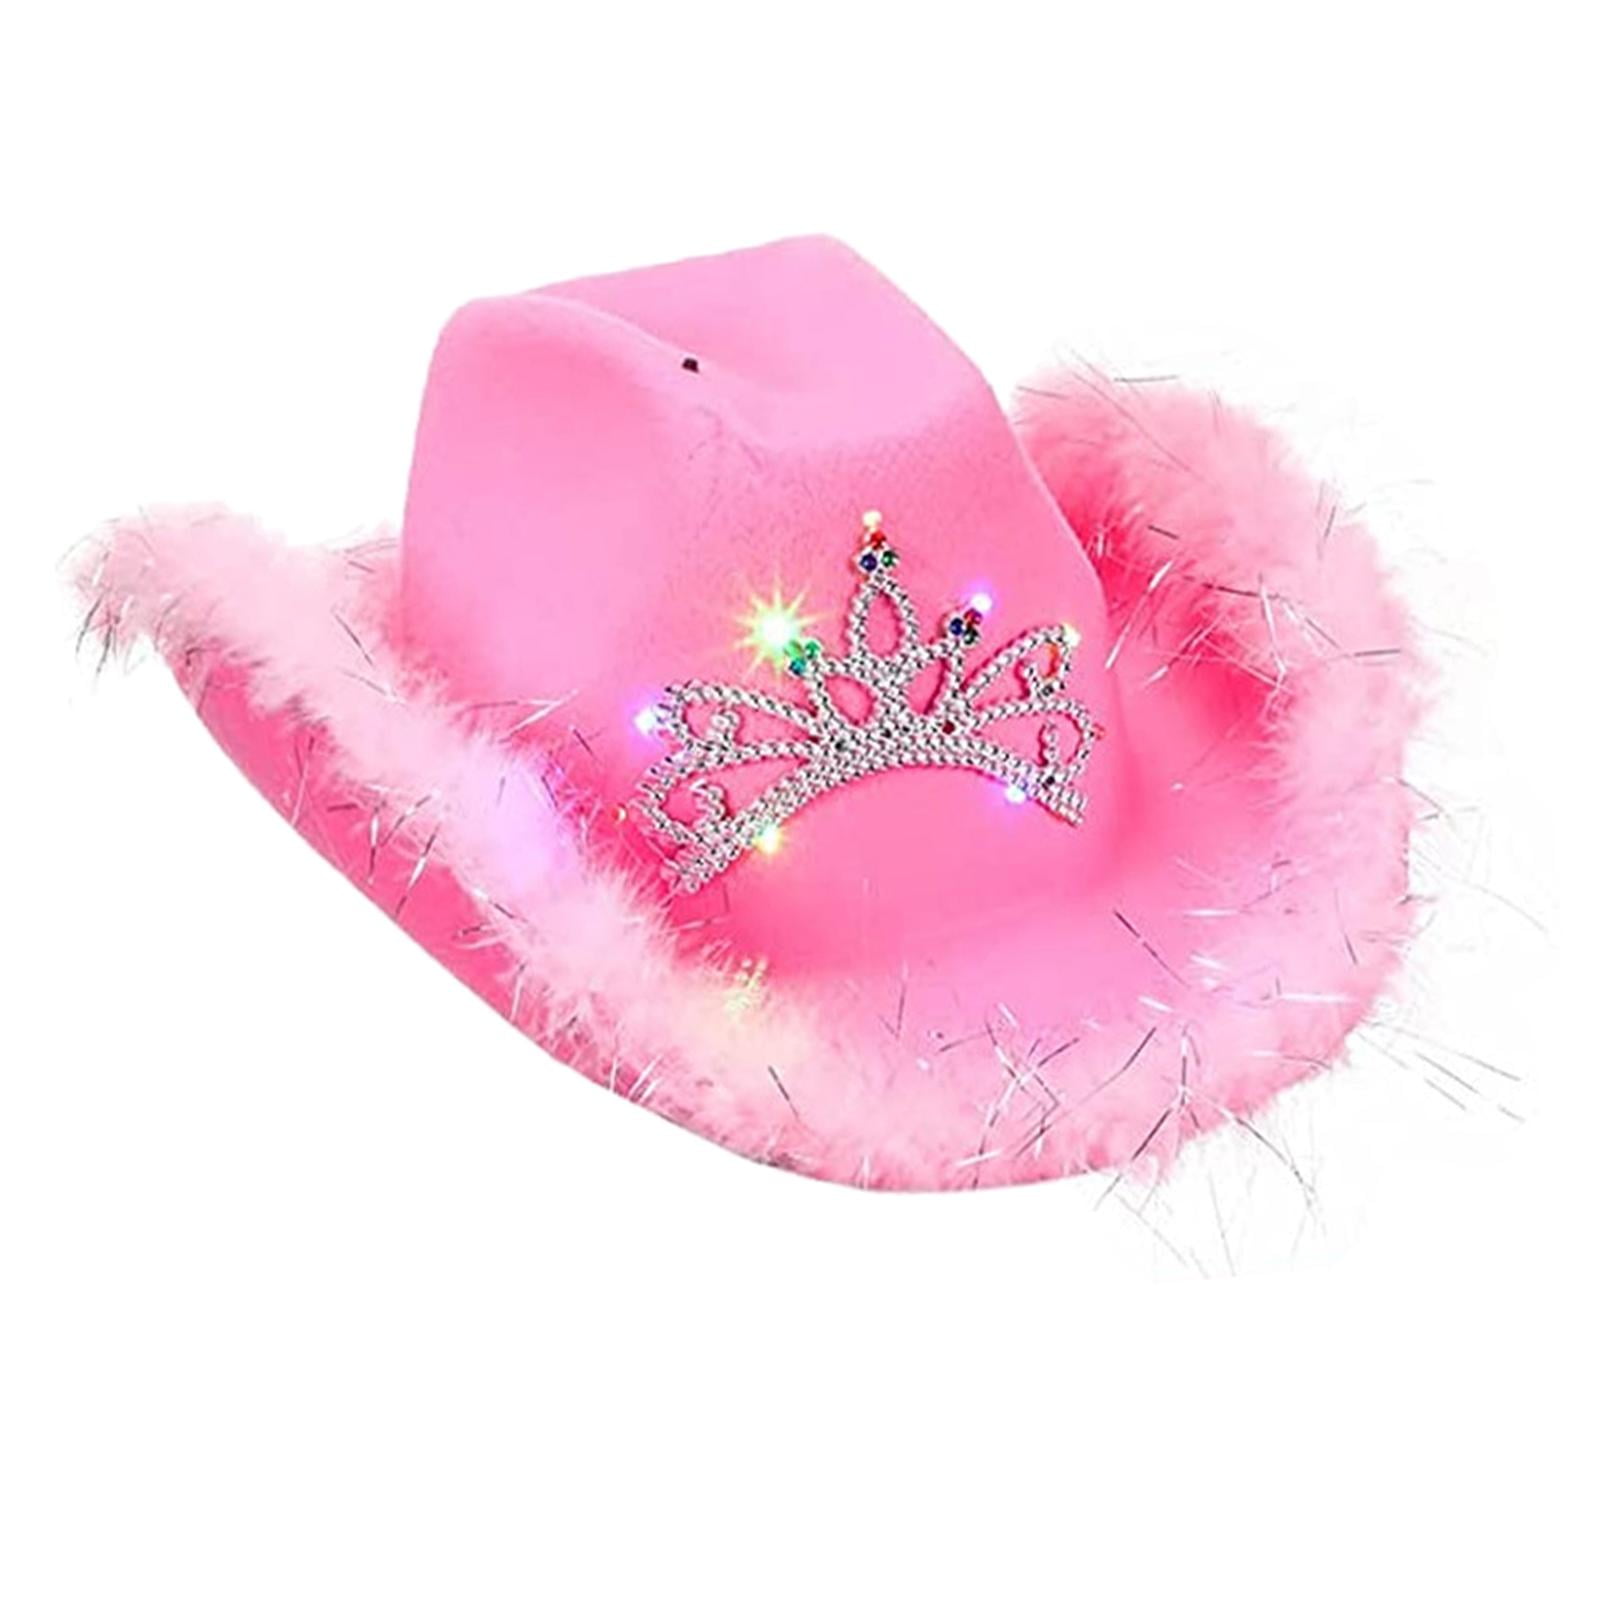 pink hat cowgirl cowgirlhat image by sunnisamara08